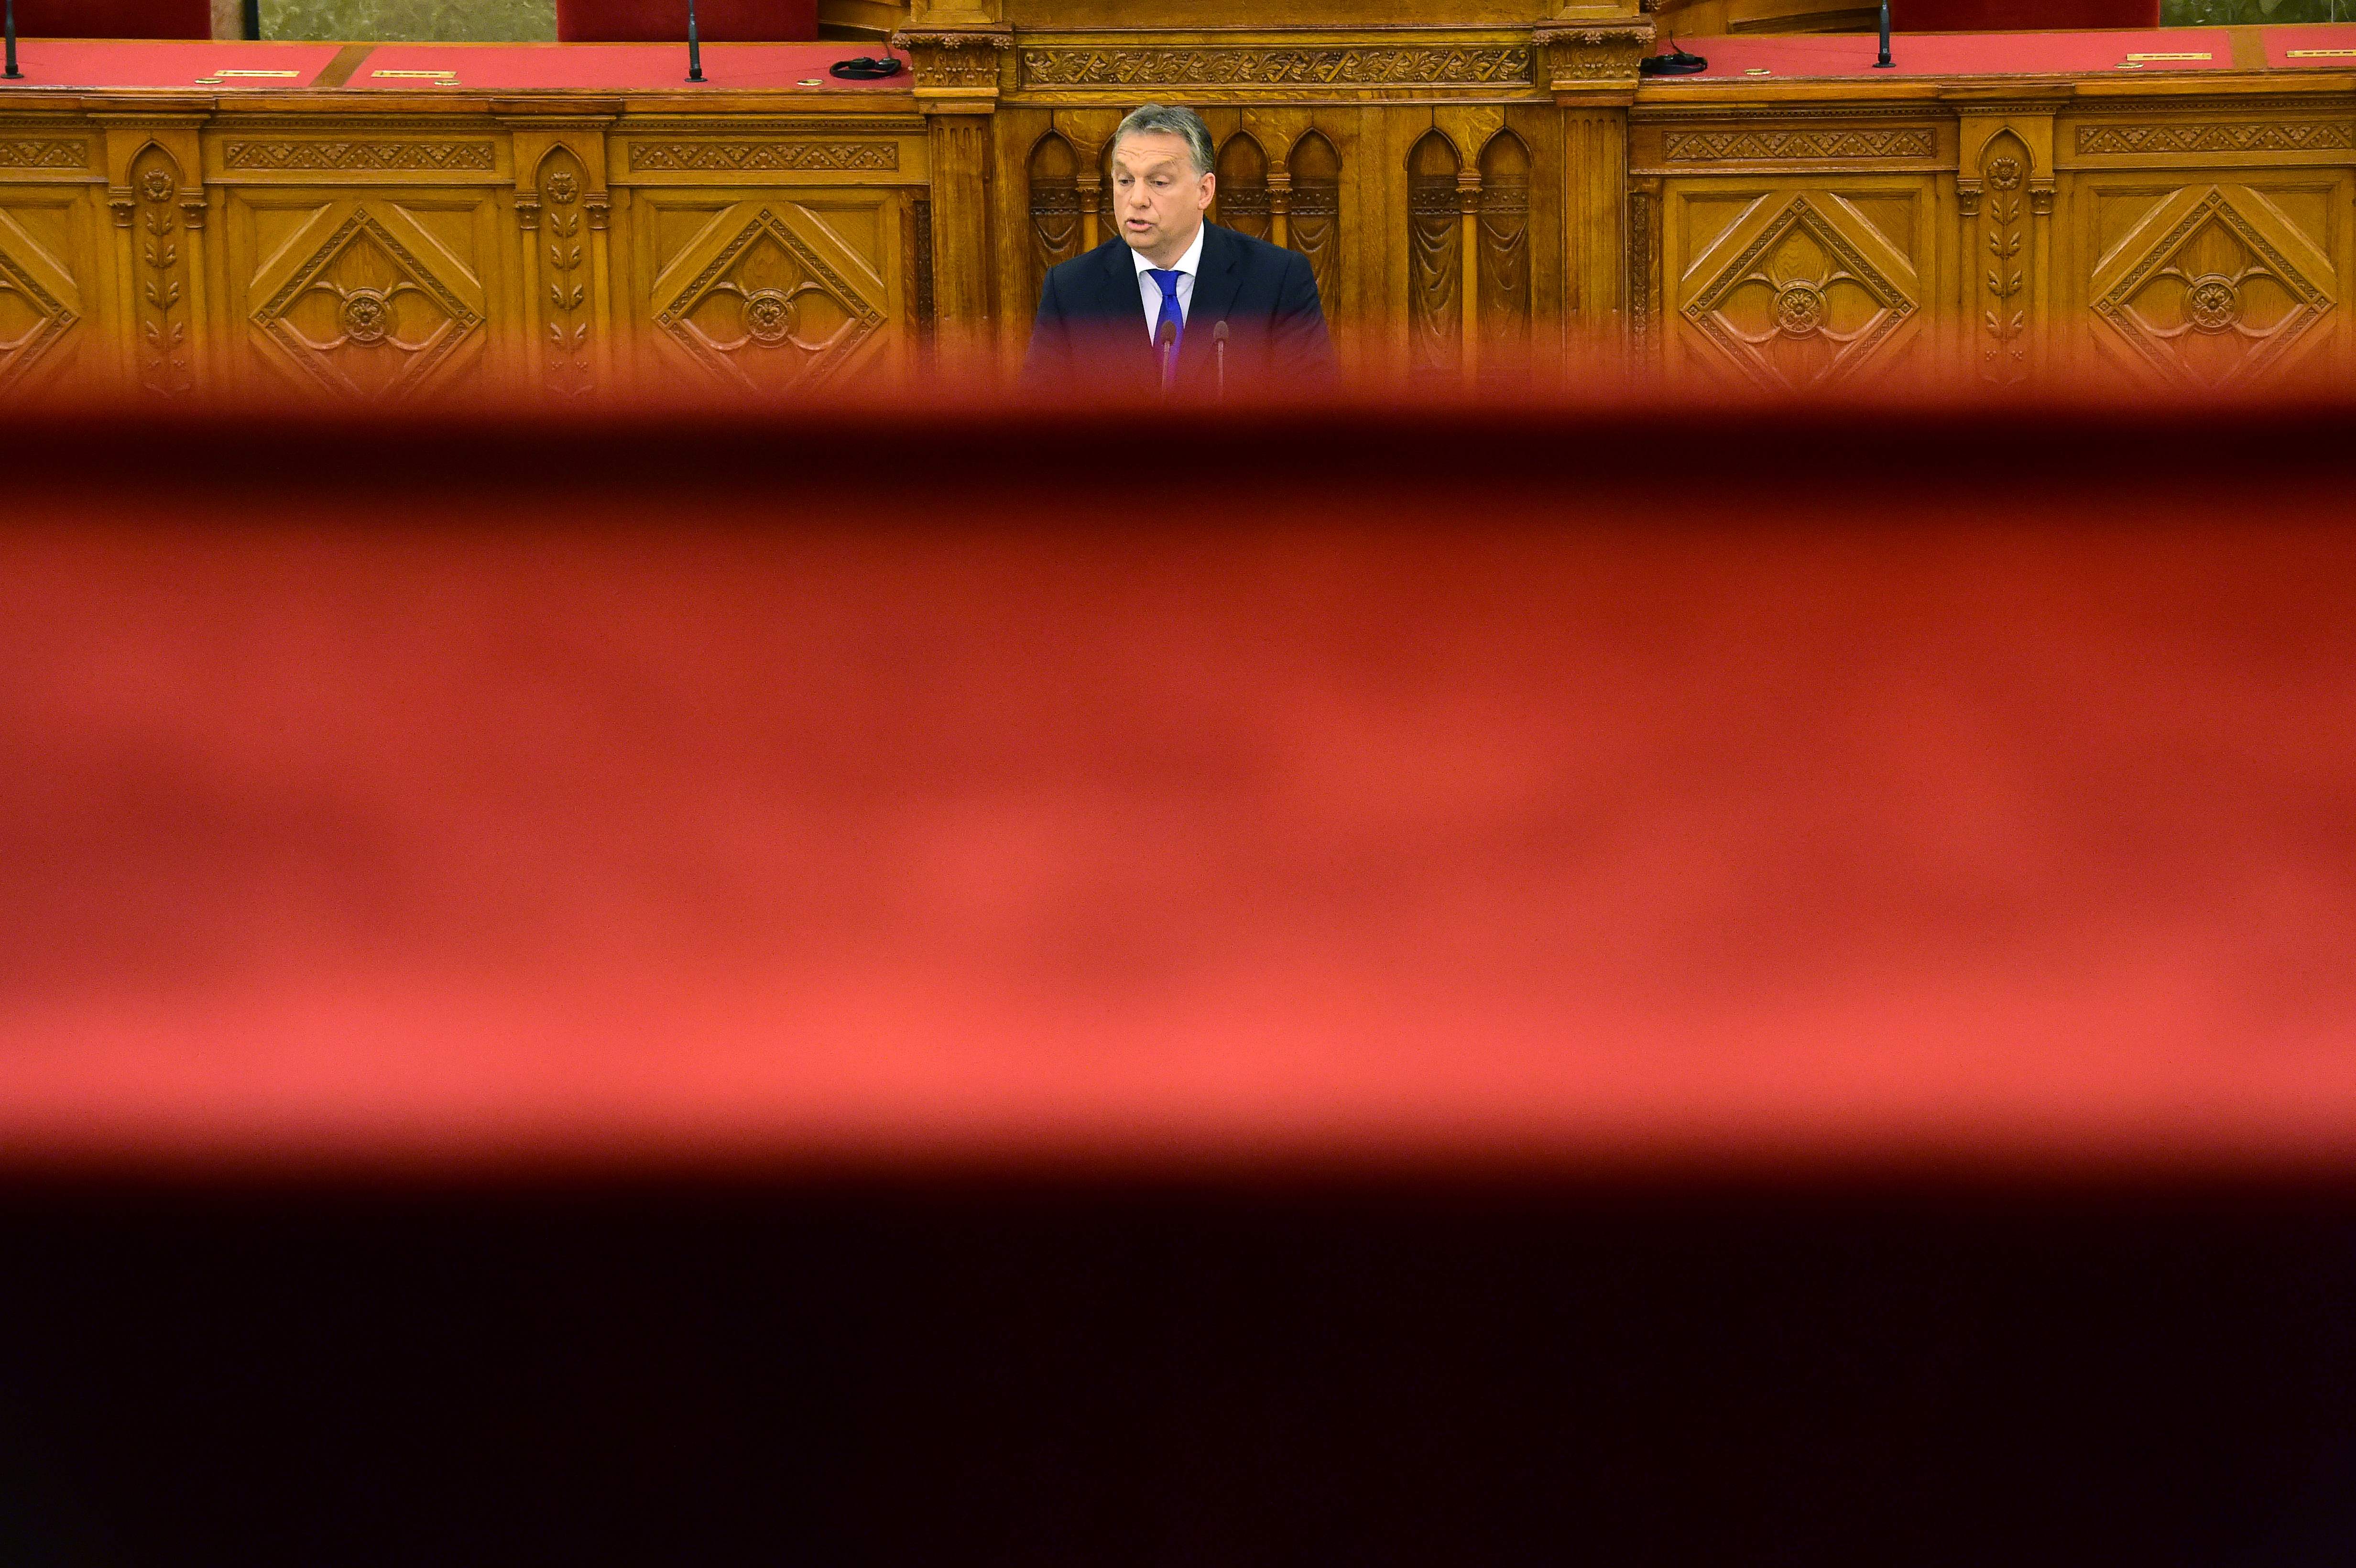 Hungarian Prime Minister Viktor Orbán holds a speech at the parliament in Budapest on April 25, 2016.   Credits: ATTILA KISBENEDEK / AFP / picturedesk.com